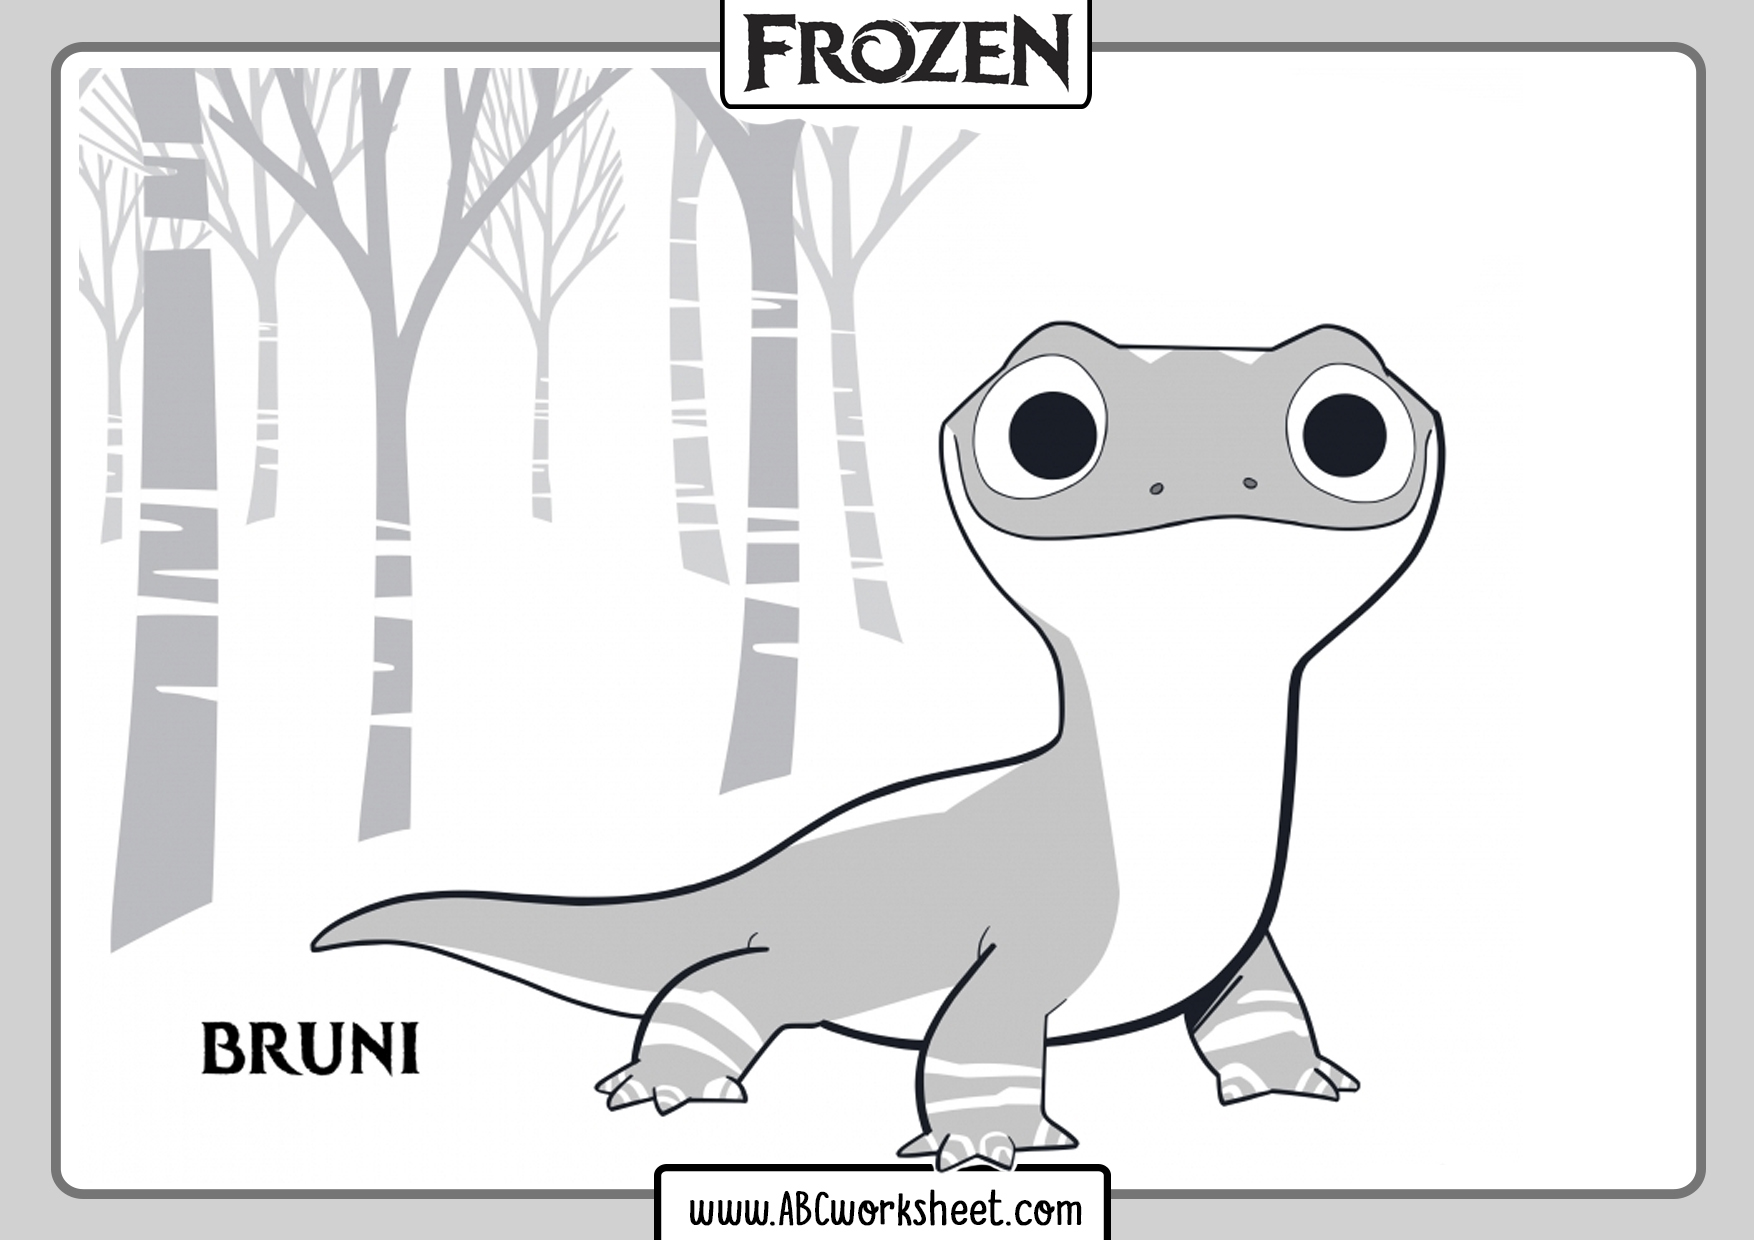 Bruni Frozen 2 Coloring Pages - ABC Worksheet